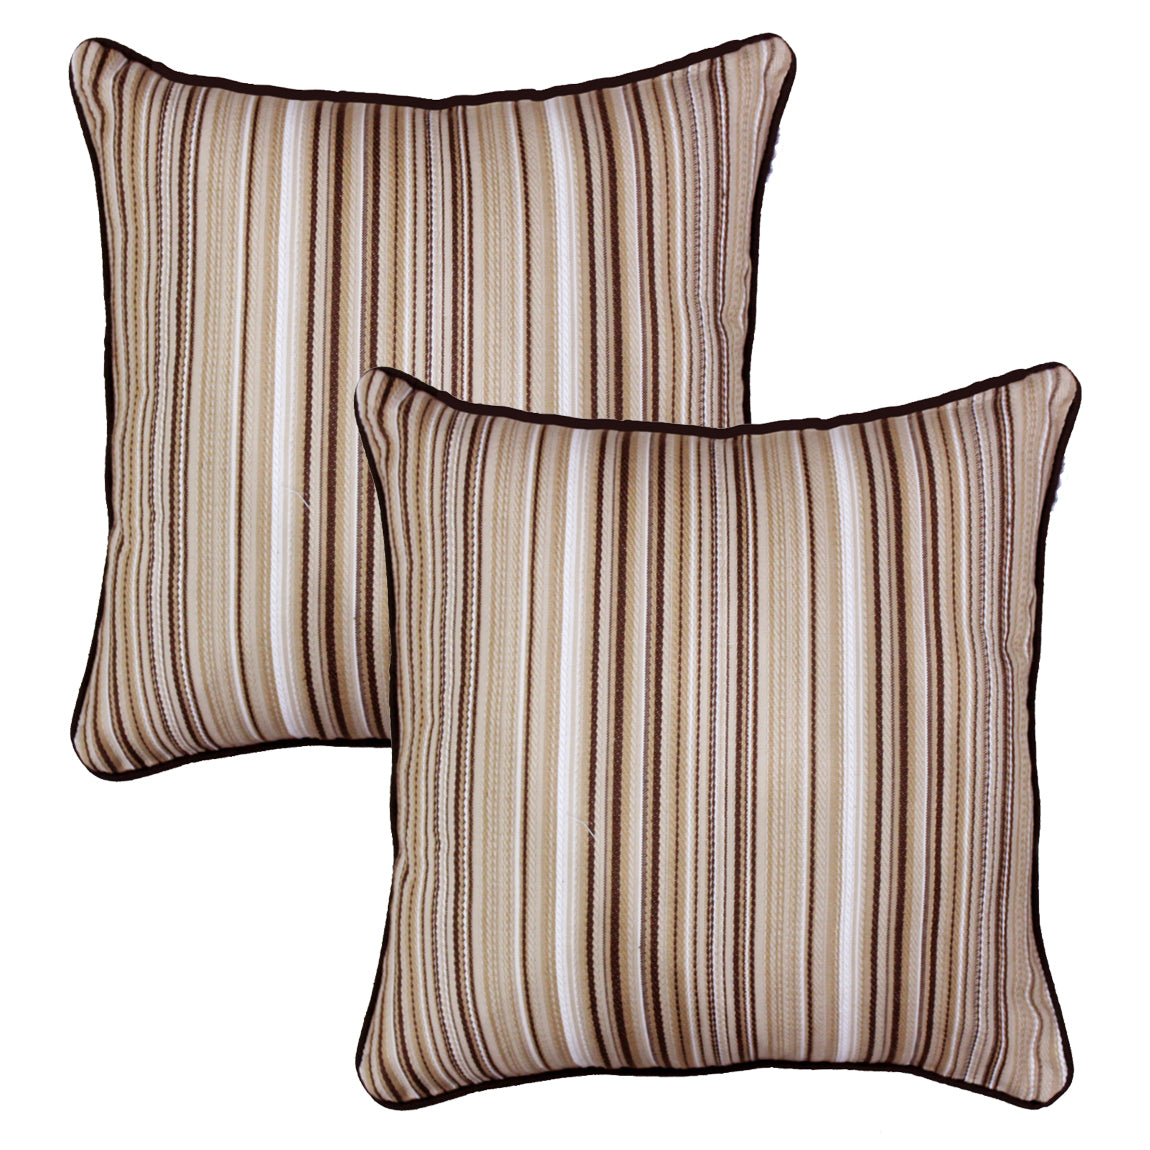 Woven Embossed Stripe Cotton 2 Pc Cushion Cover - Brown